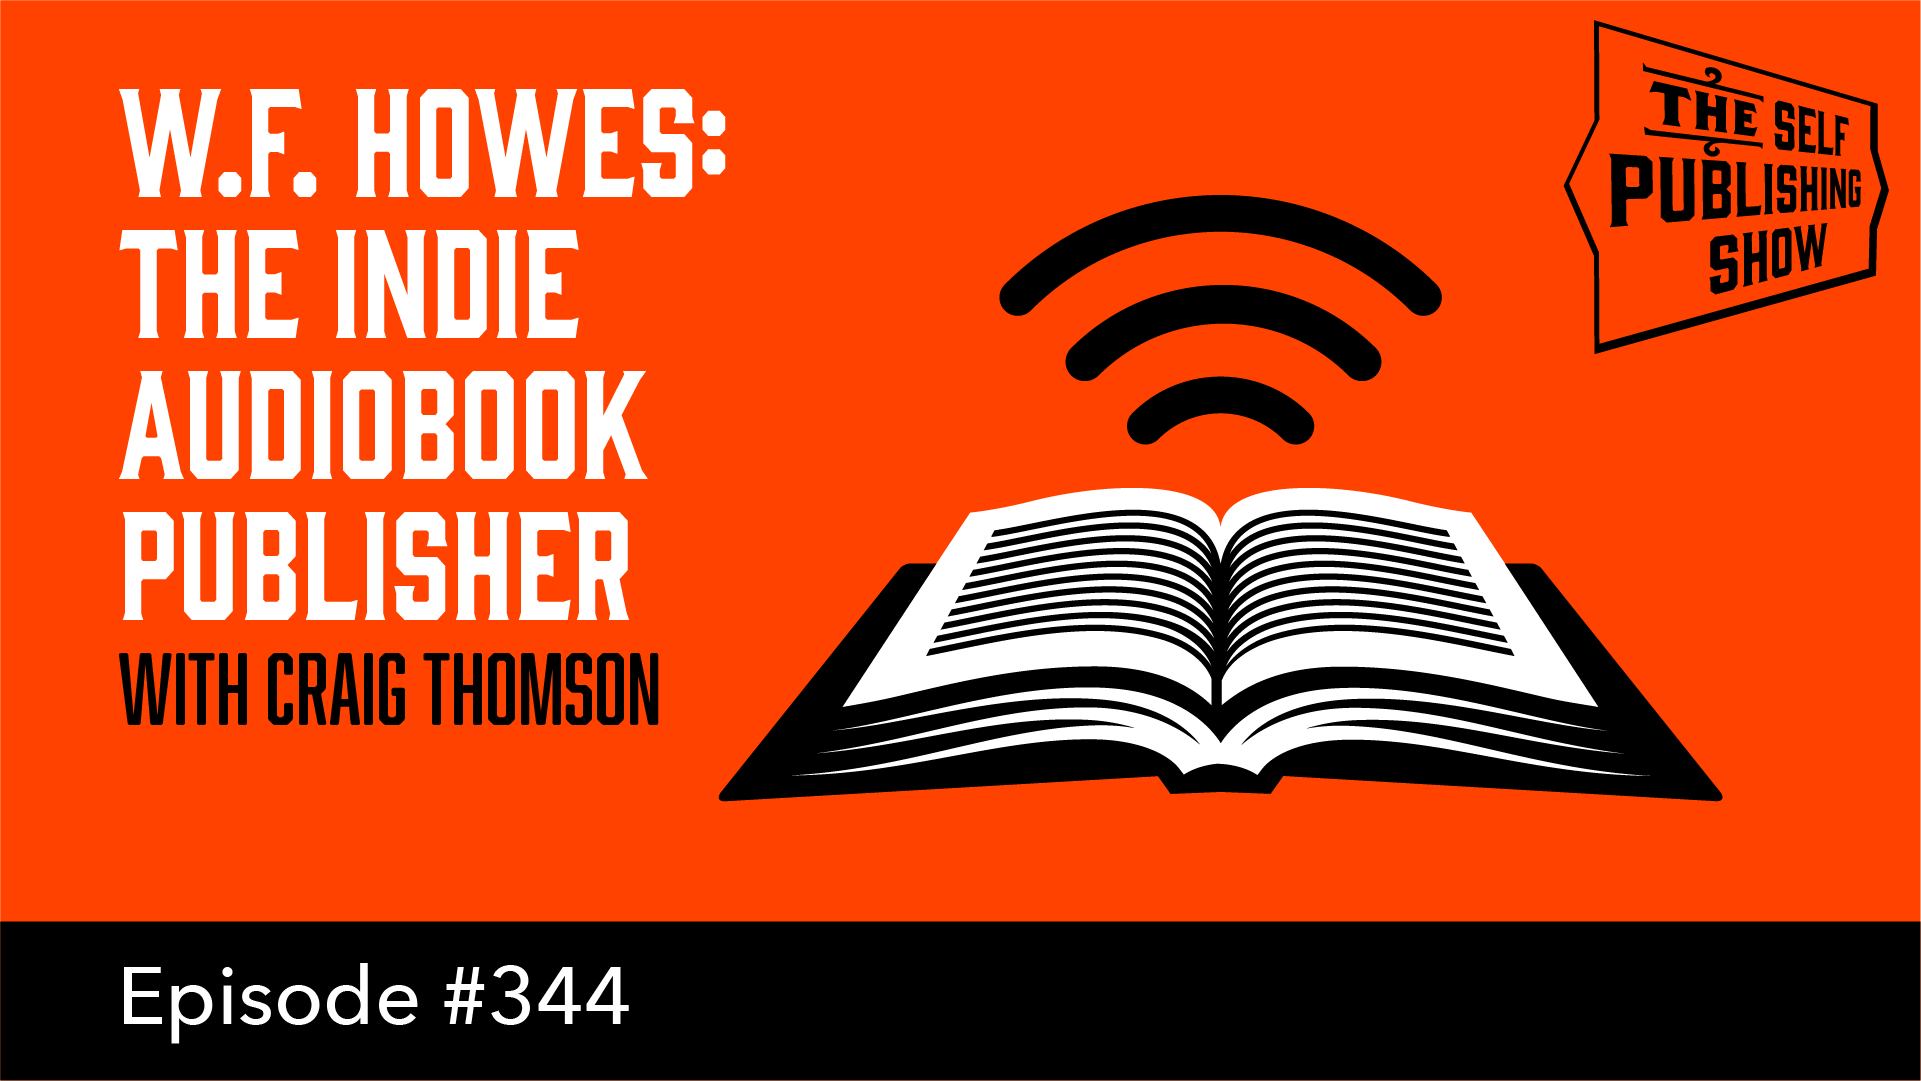 SPS-344: W.F. Howes: The Indie Audiobook Publisher – with Craig Thomson